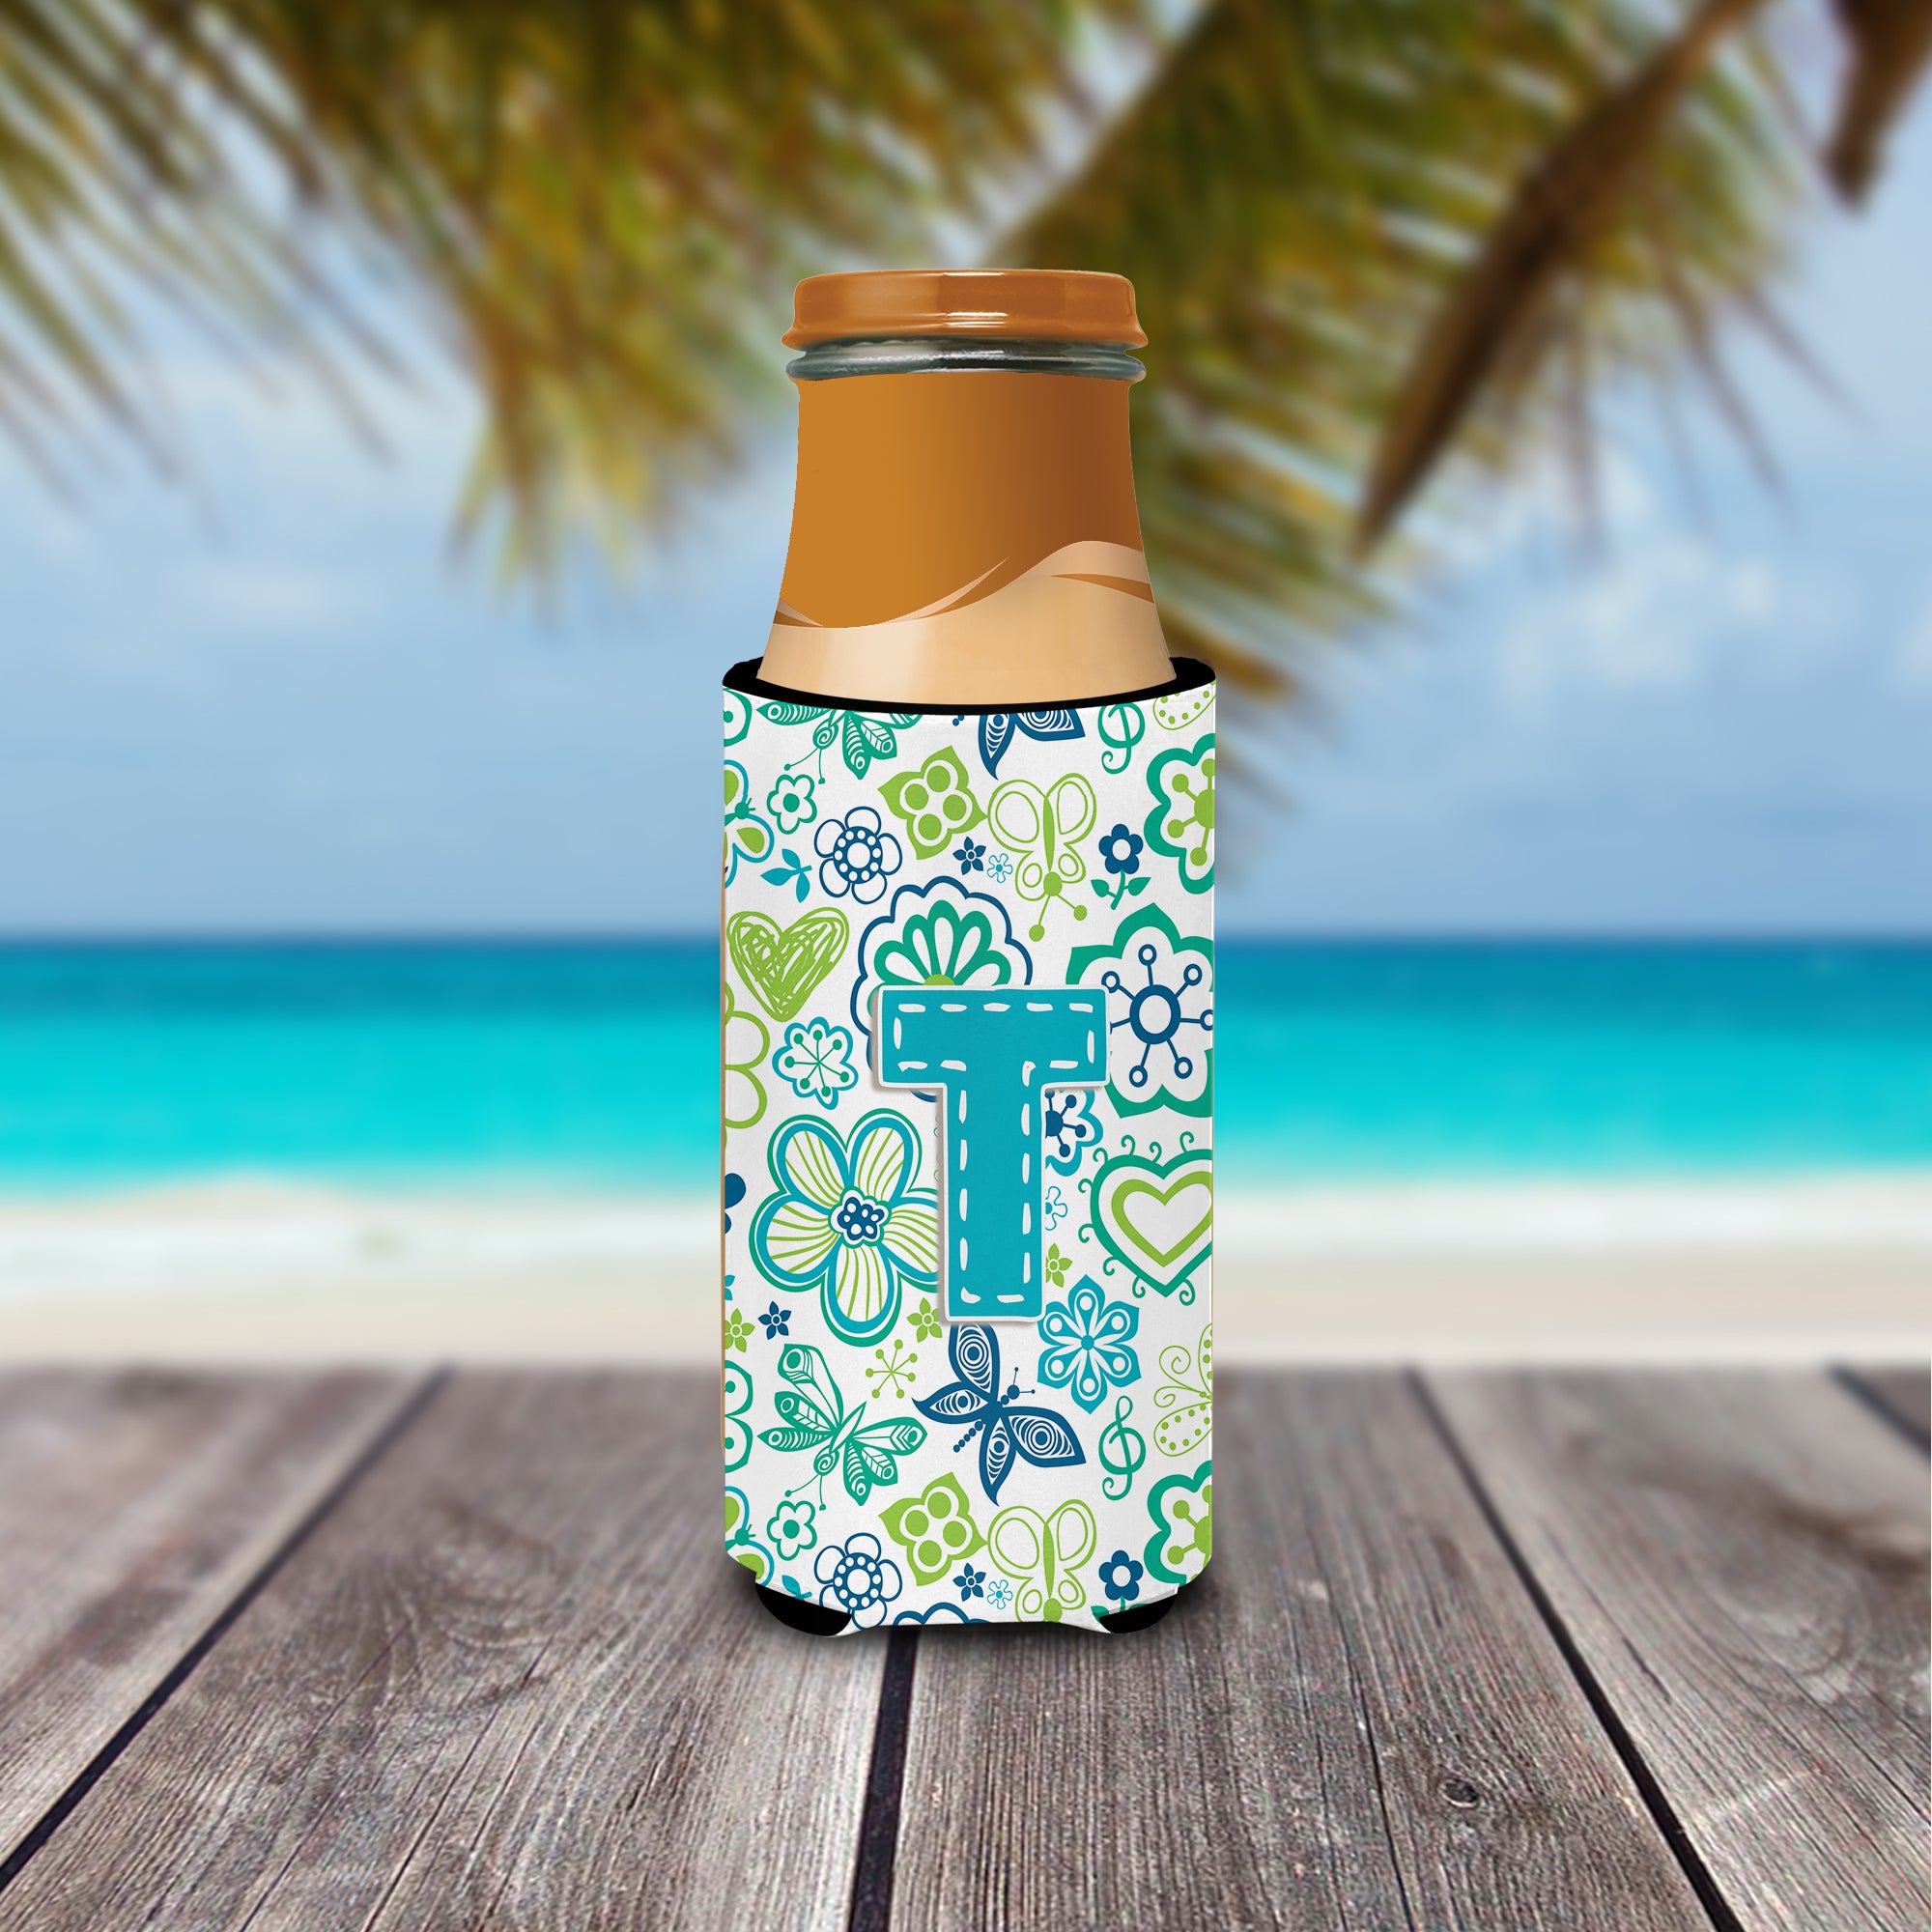 Letter T Flowers and Butterflies Teal Blue Ultra Beverage Insulators for slim cans CJ2006-TMUK.